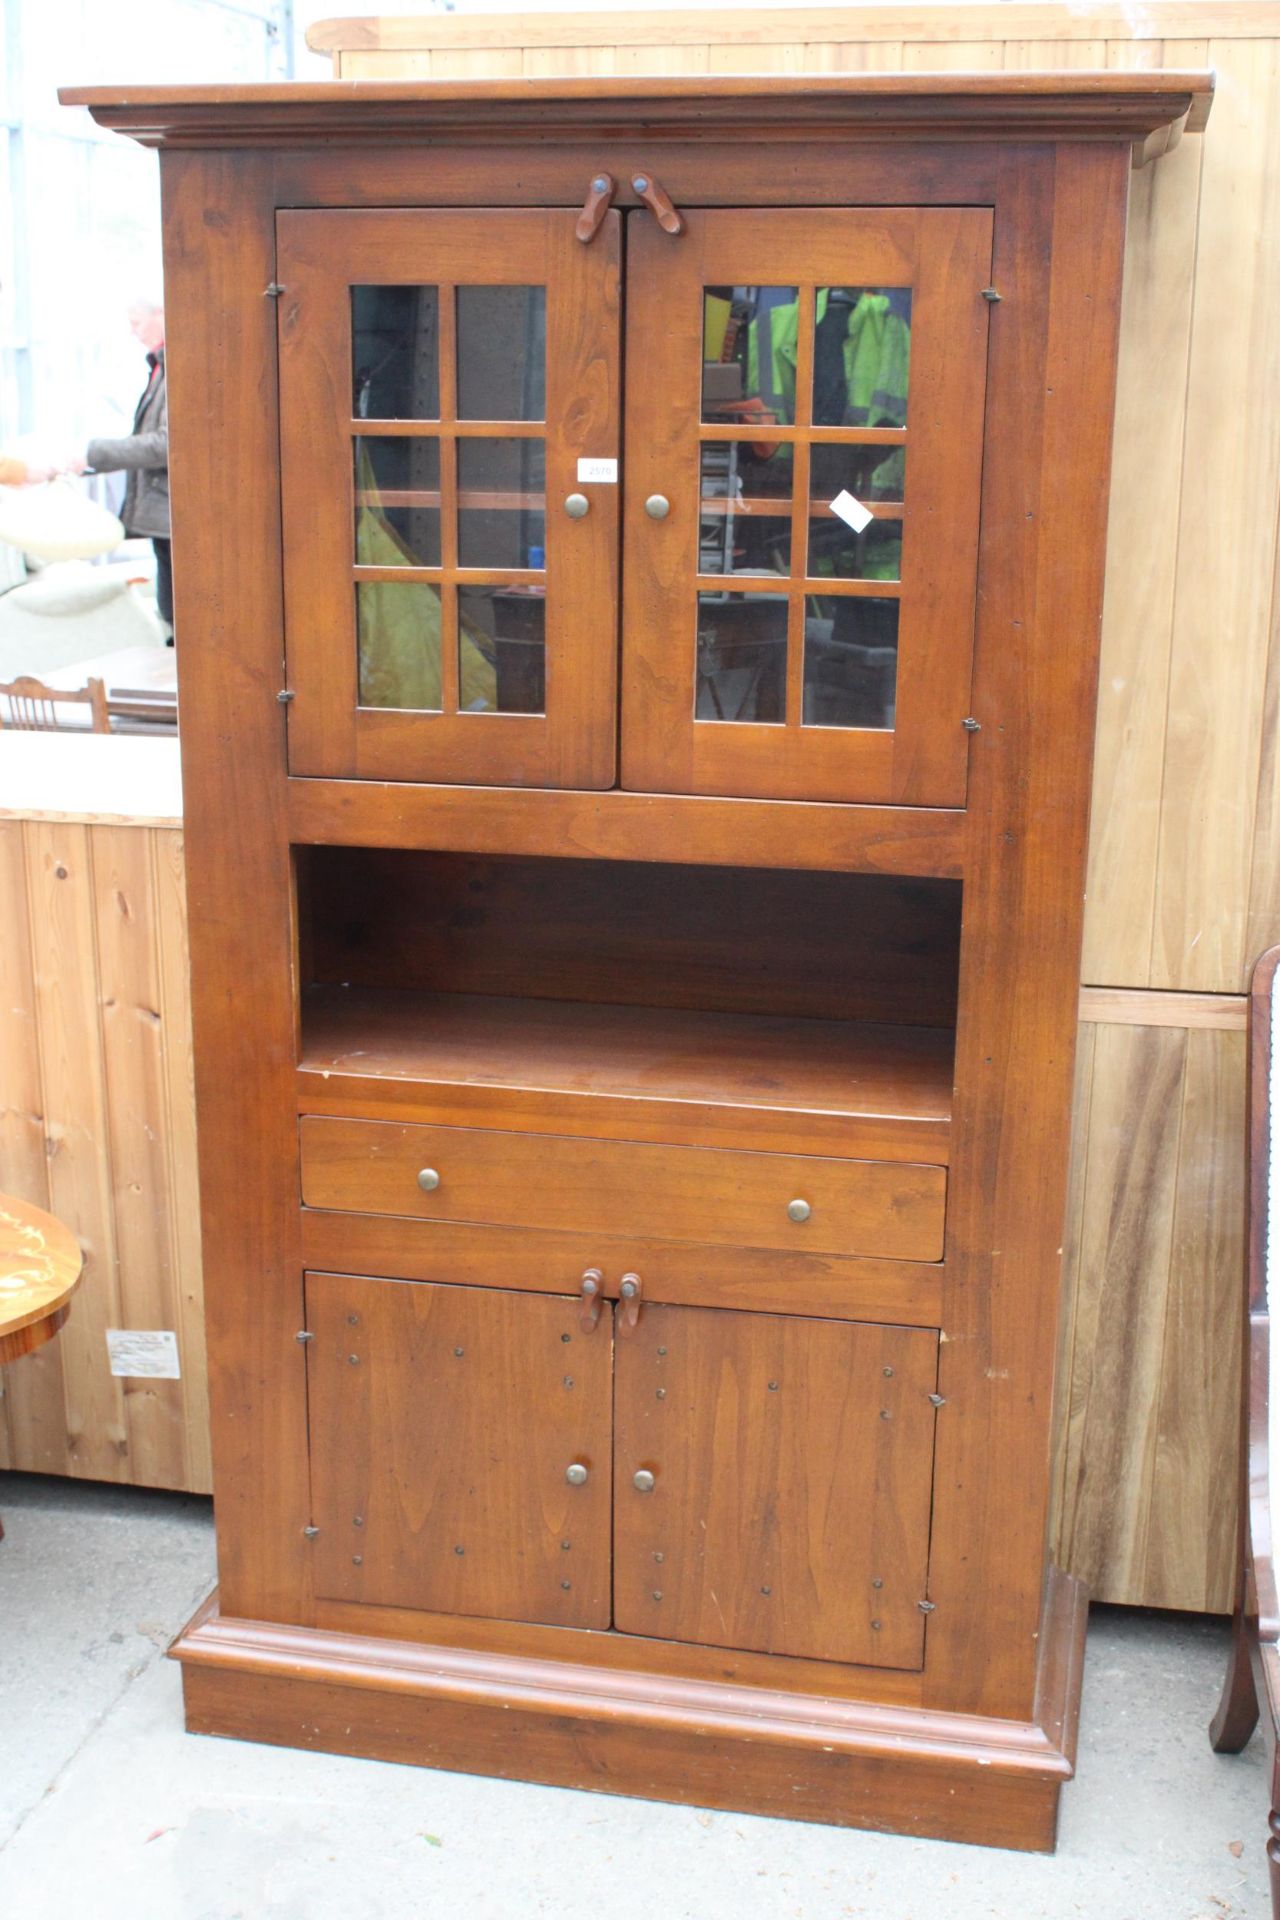 A HARDWOOD CUPBOARD WITH GLAZED UPPER PORTION, SINGLE DRAWER AND CUPBOARD TO BASE, 43" WIDE